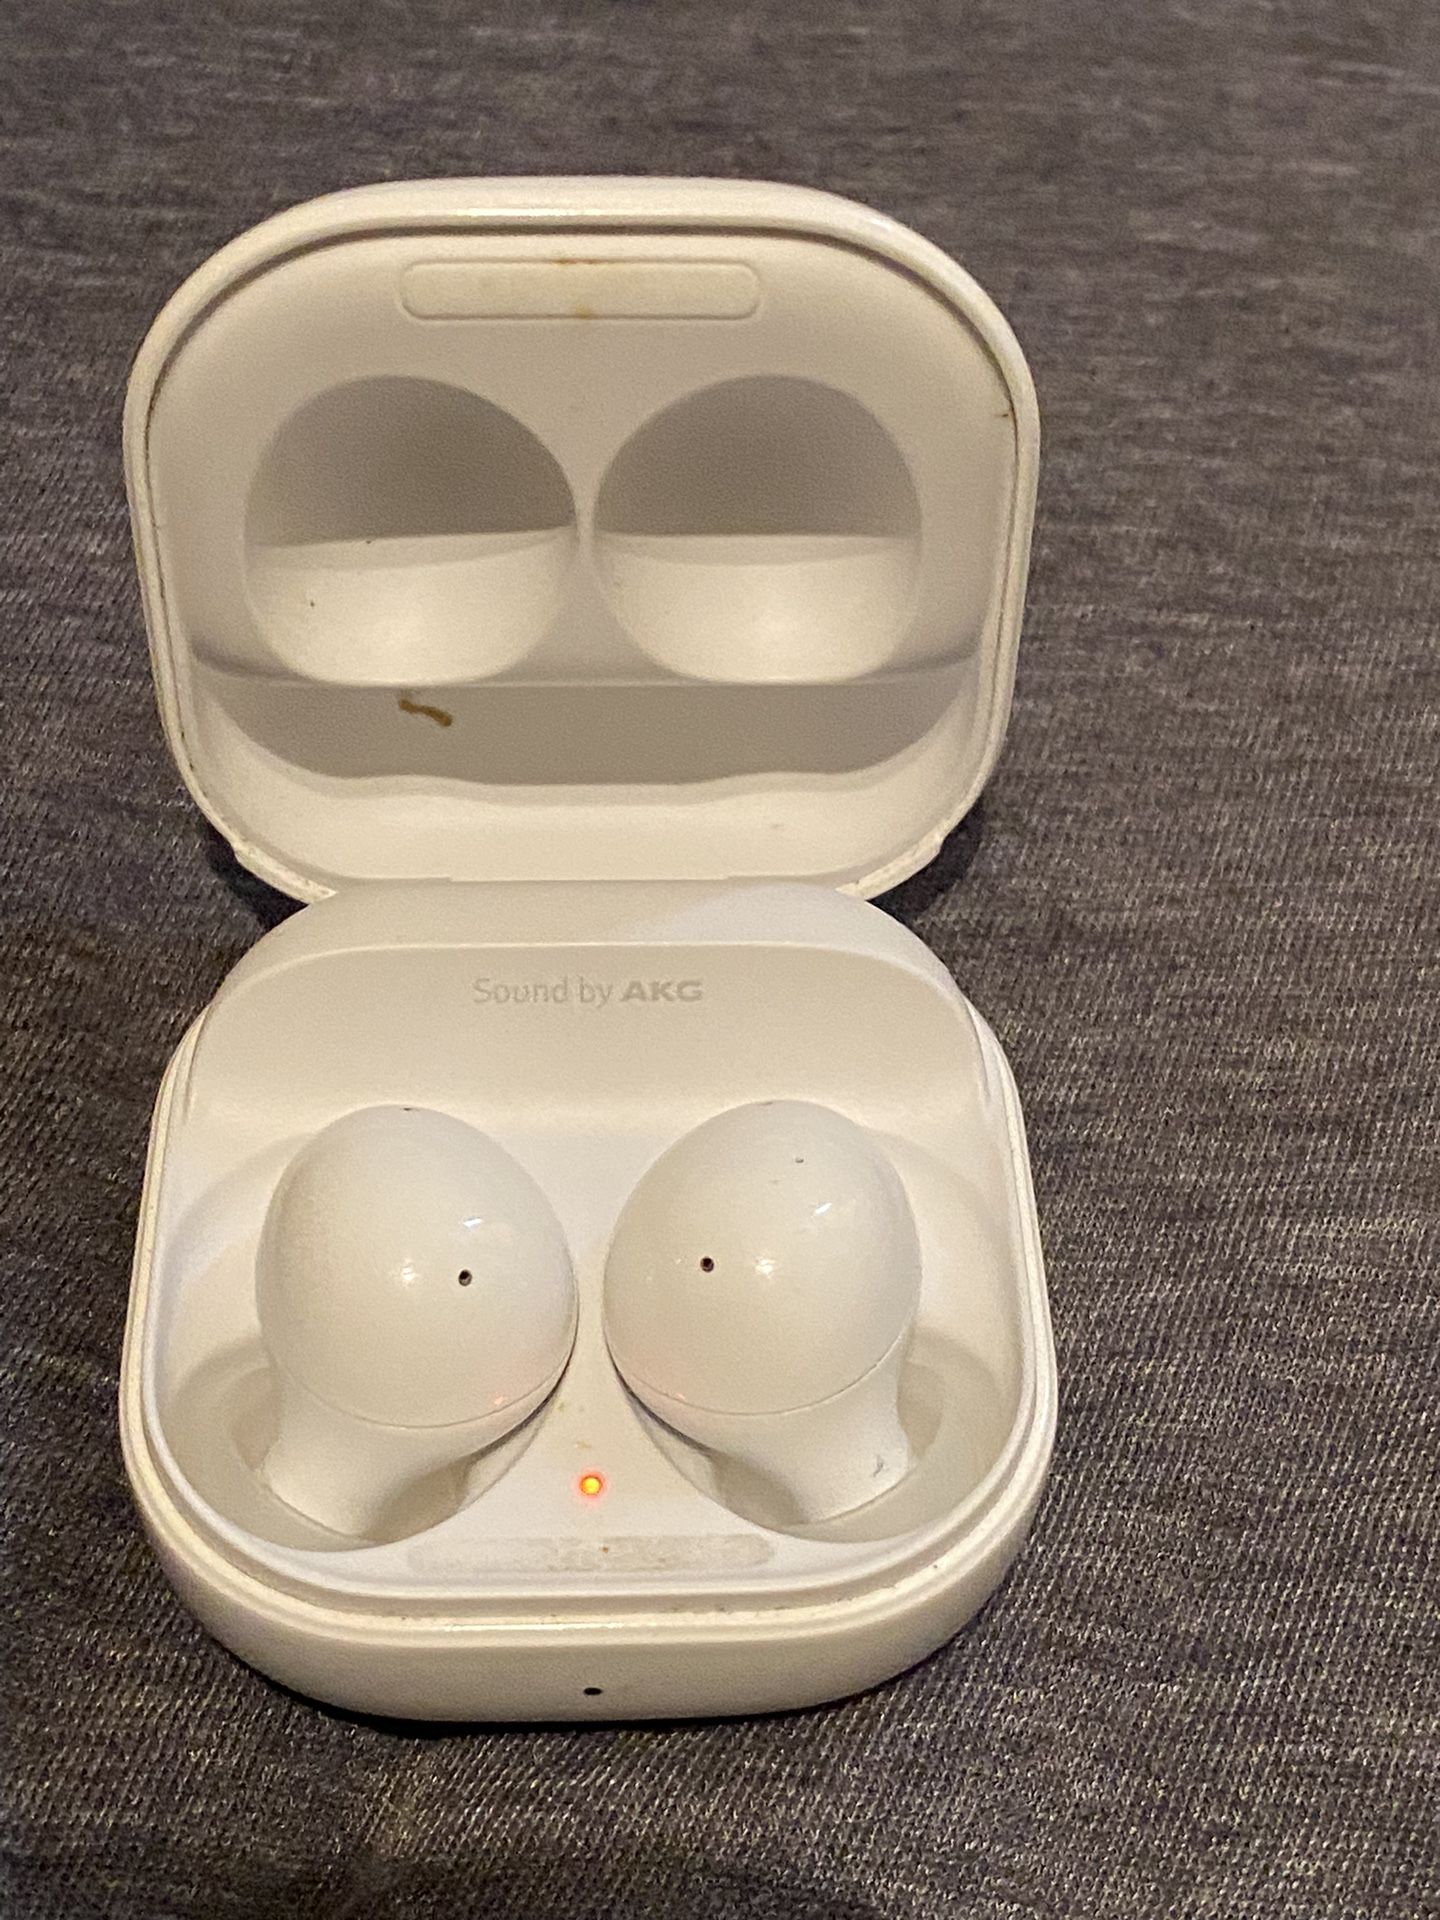 SAMSUNG  Galaxy Buds 2 True Wireless Bluetooth Earbuds, only the right side buds 2 works the left, buds 2 not works Bad. Noise Cancelling, Comfort Fit